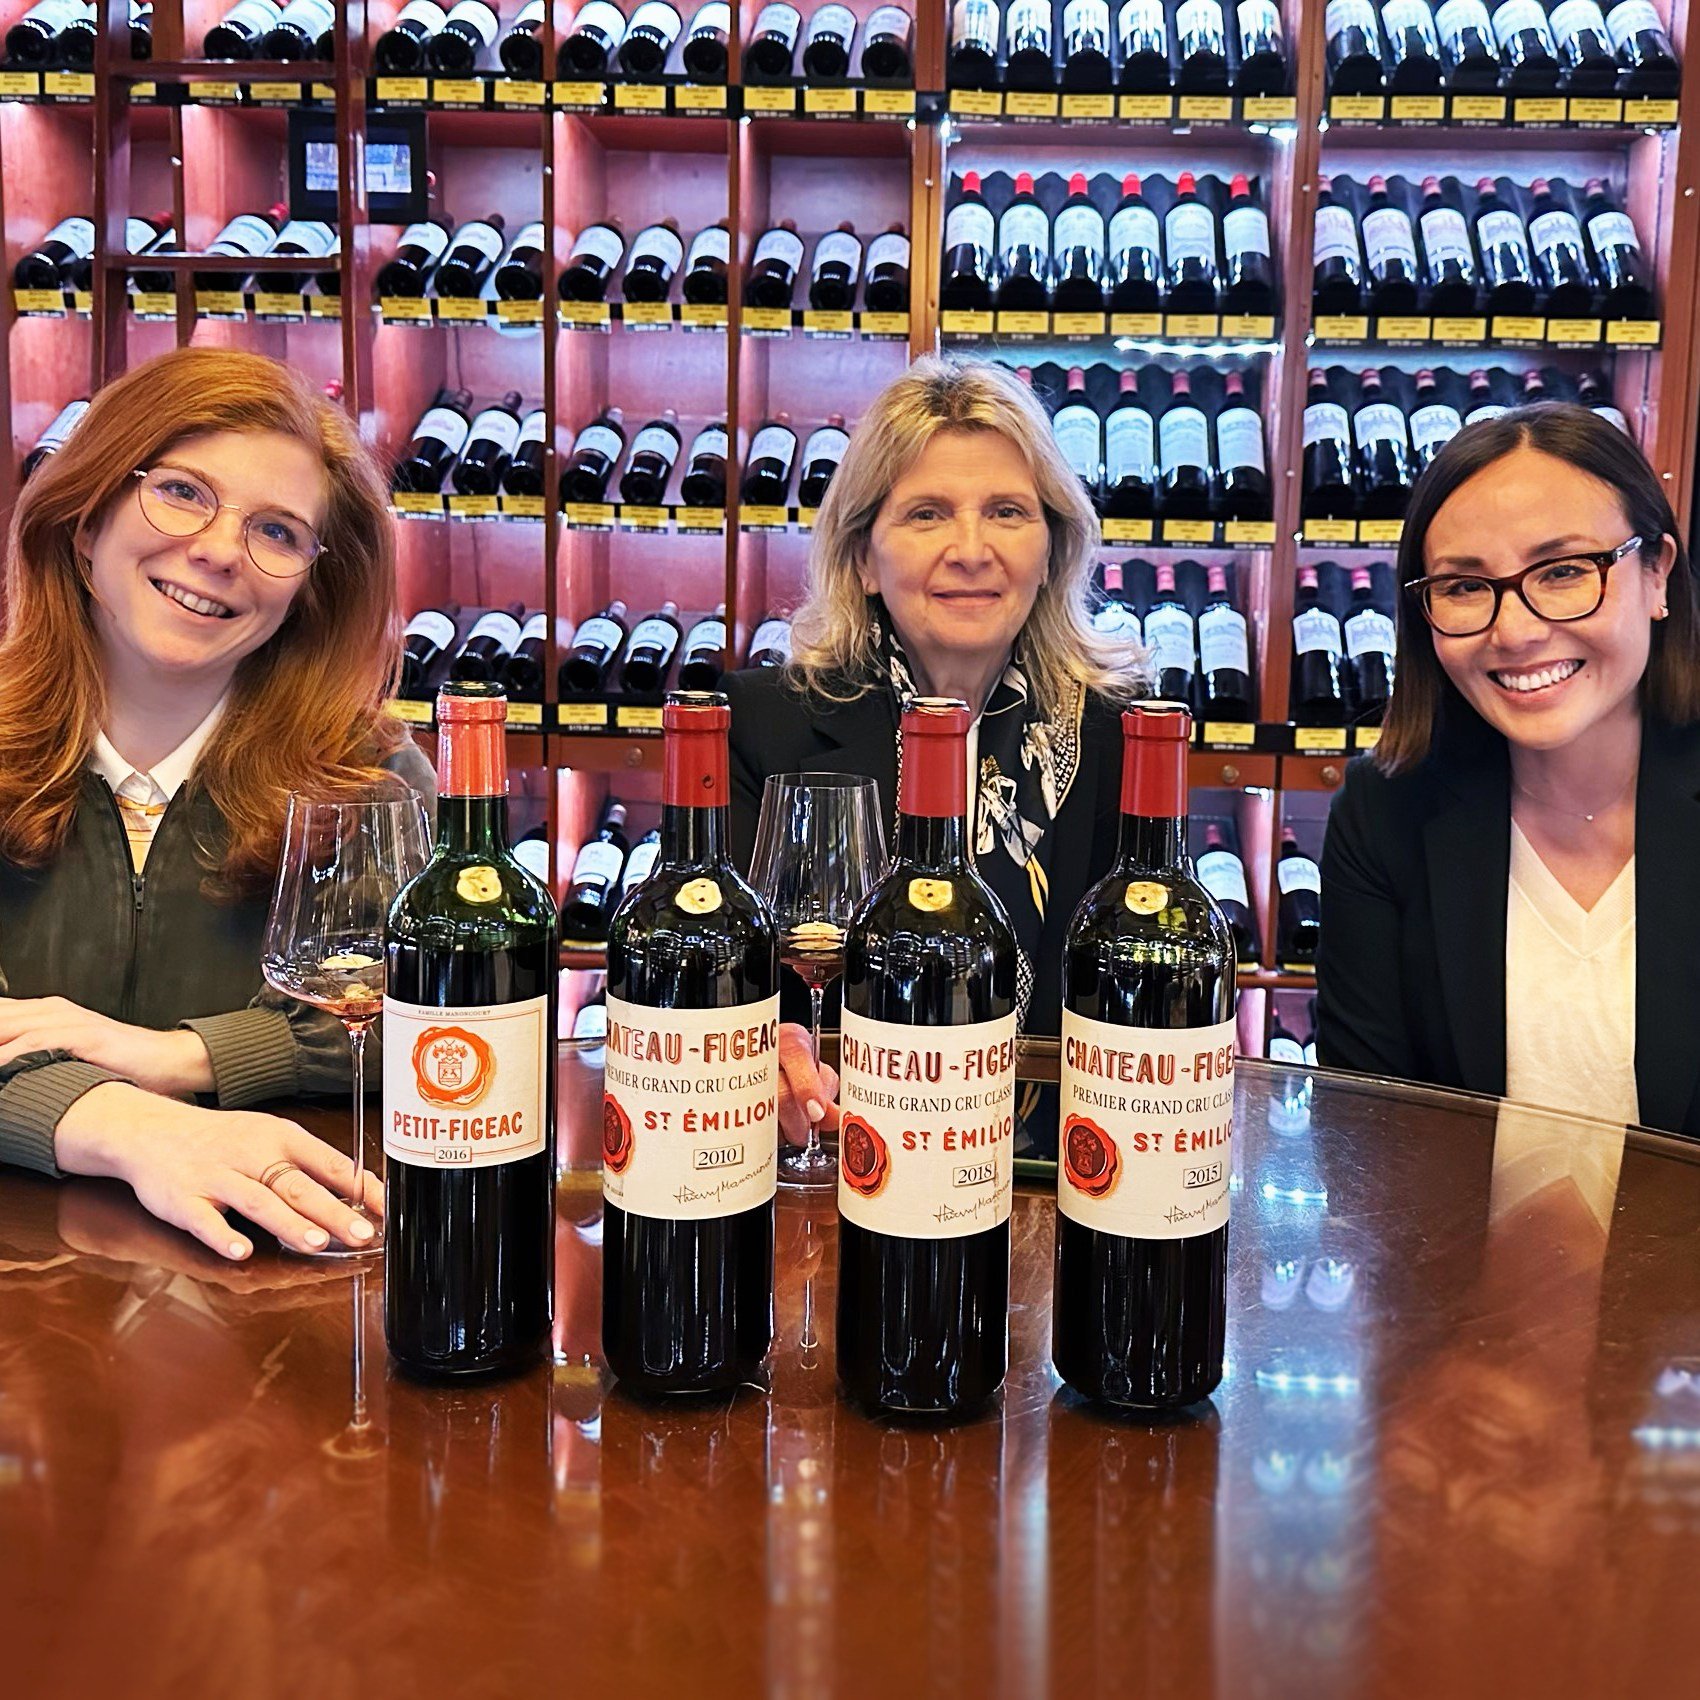 The MISA California team has been hard at work, touring and tasting with Ch&acirc;teau Figeac! This amazing estate was promoted to the highest ranking of 1er Grand Cru Class&eacute; A in 2022, and definitely impressed all who sampled it. Thanks to ou